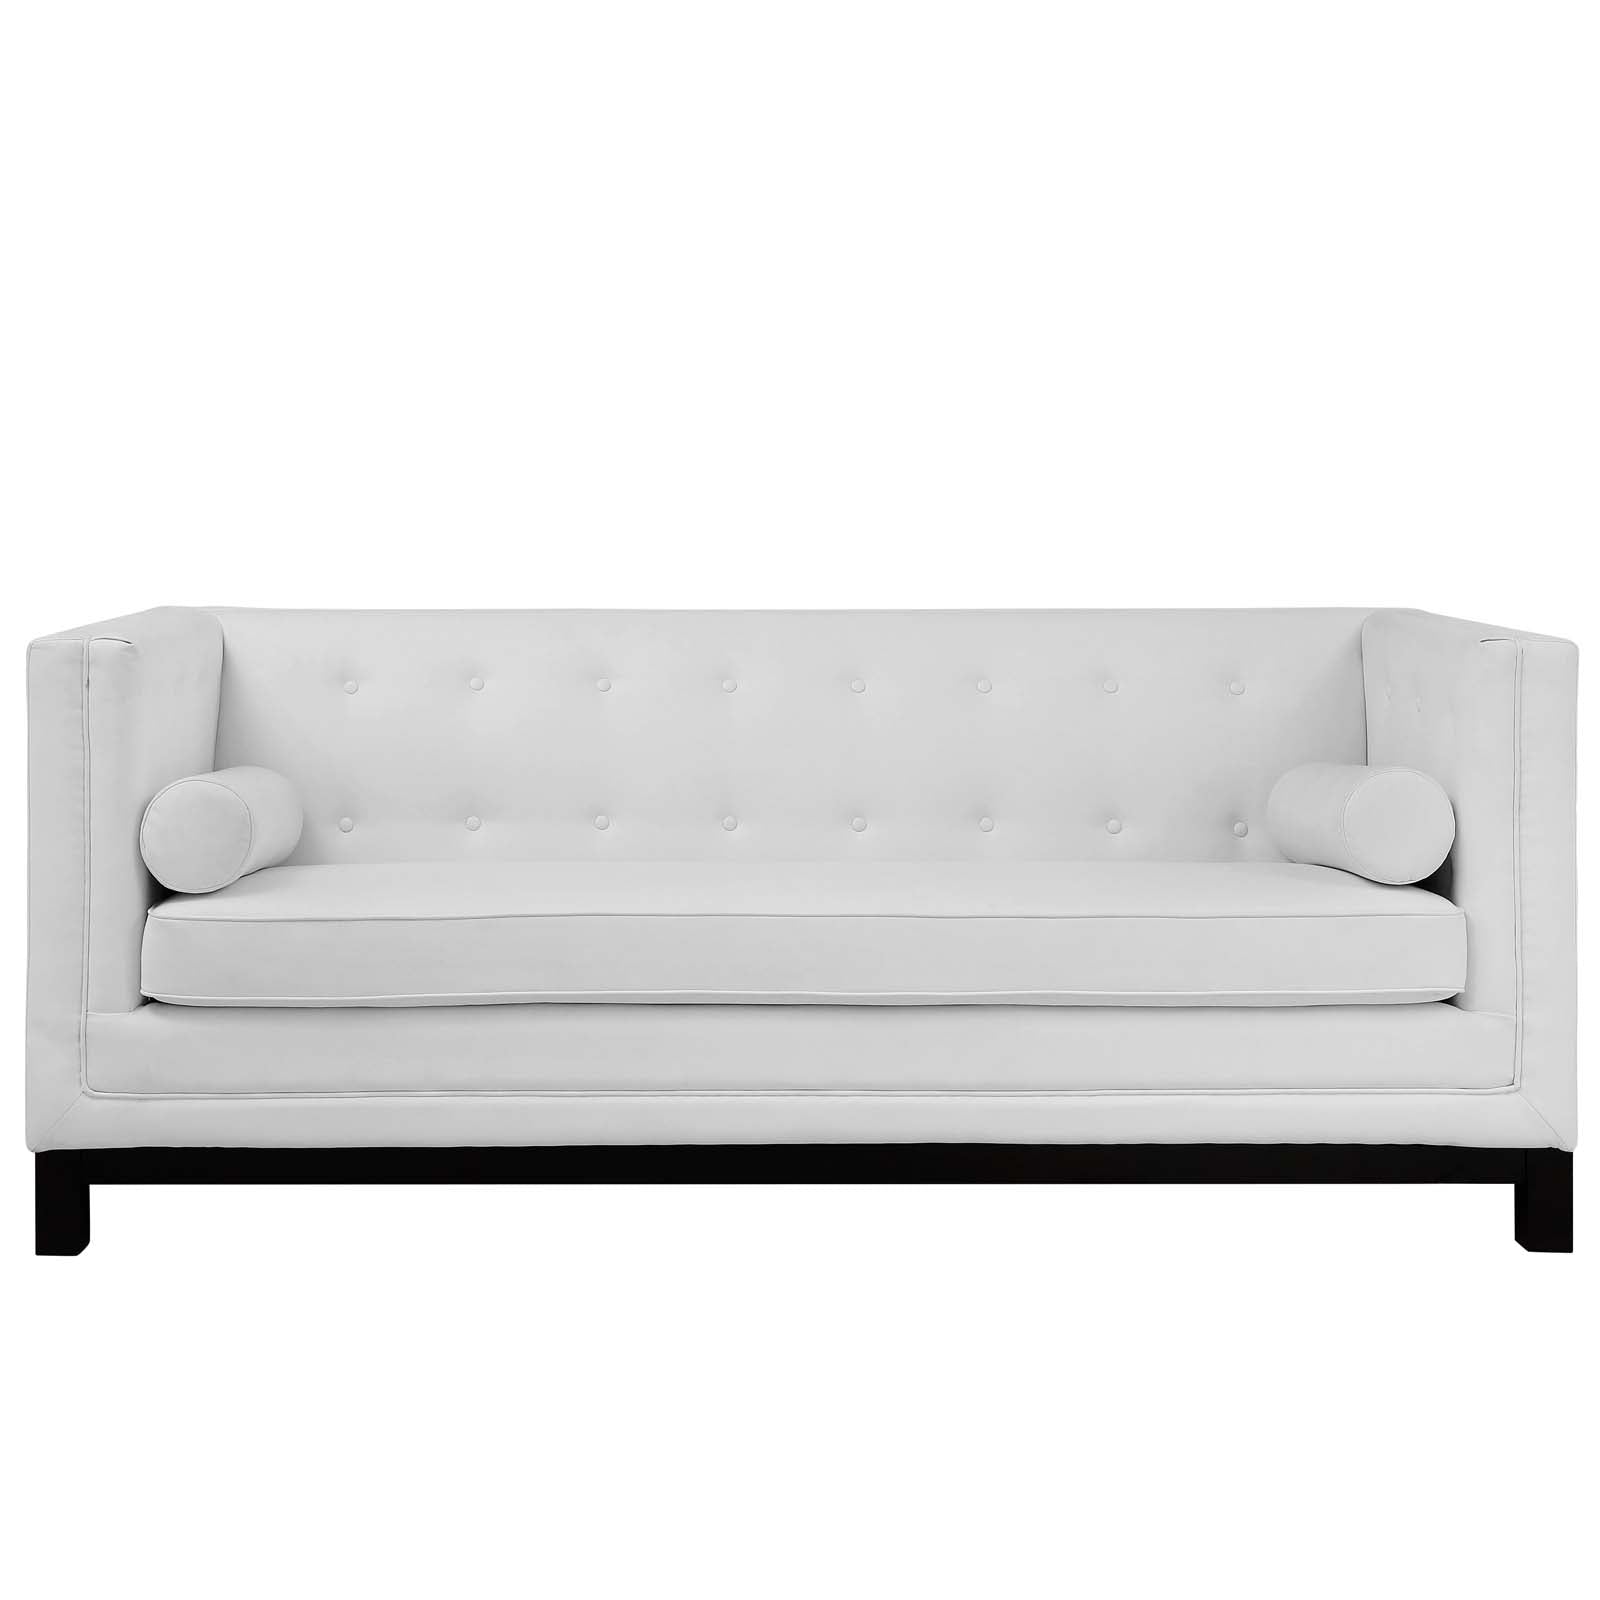 Imperial Bonded Leather Sofa